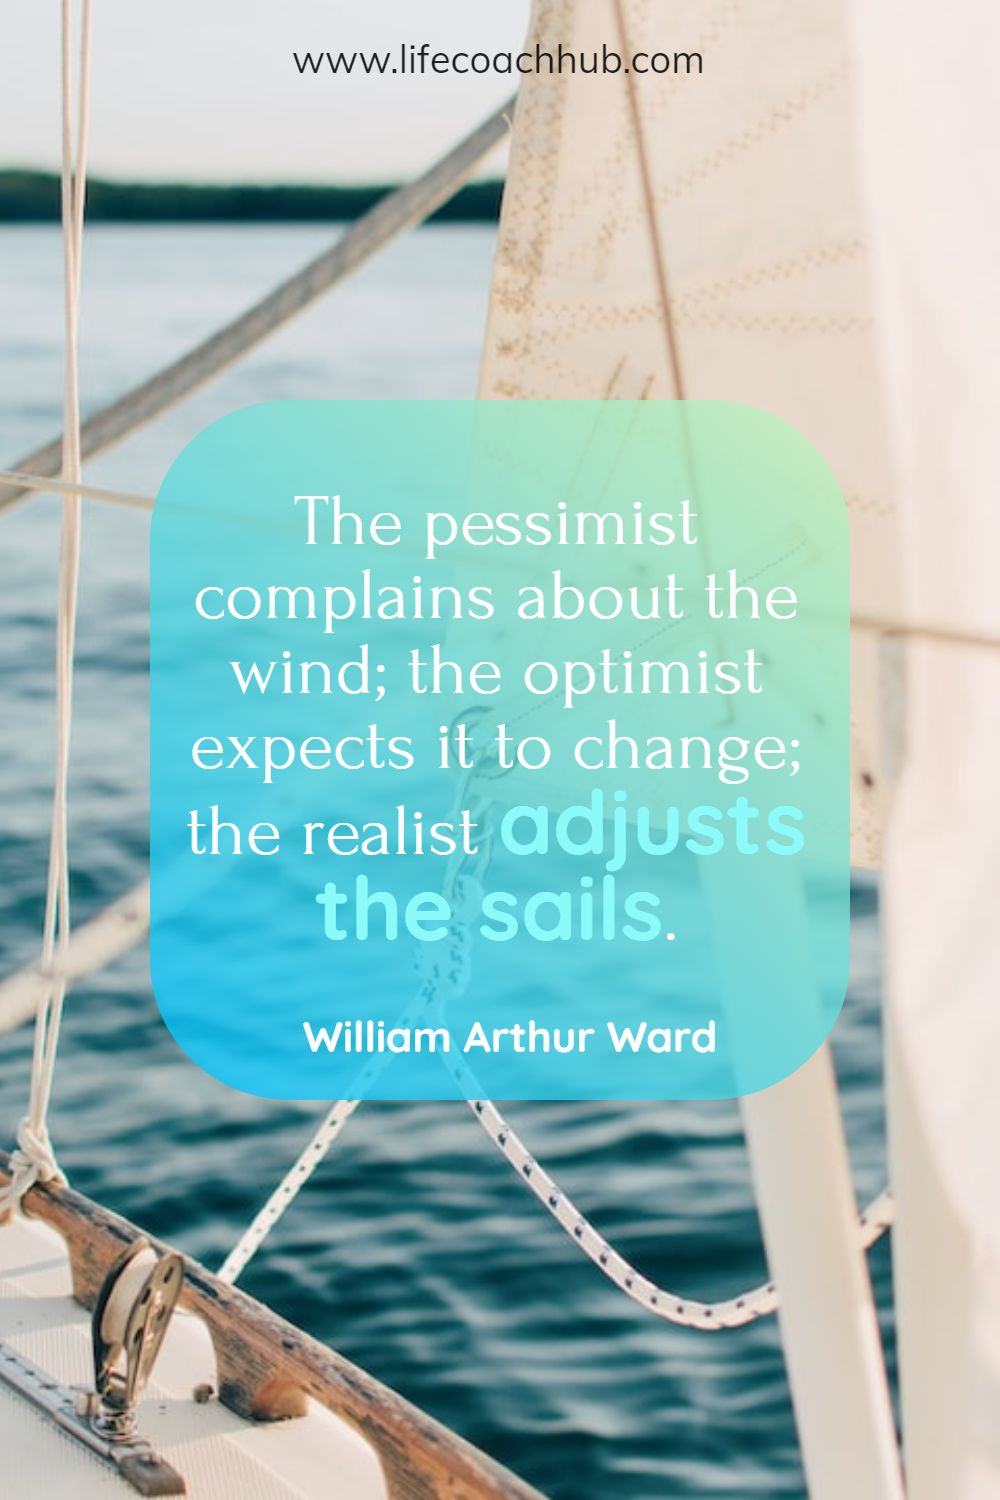 The pessimist complains about the wind; the optimist expects it to change; the realist adjusts the sails. William Arthur Ward Coaching Quote